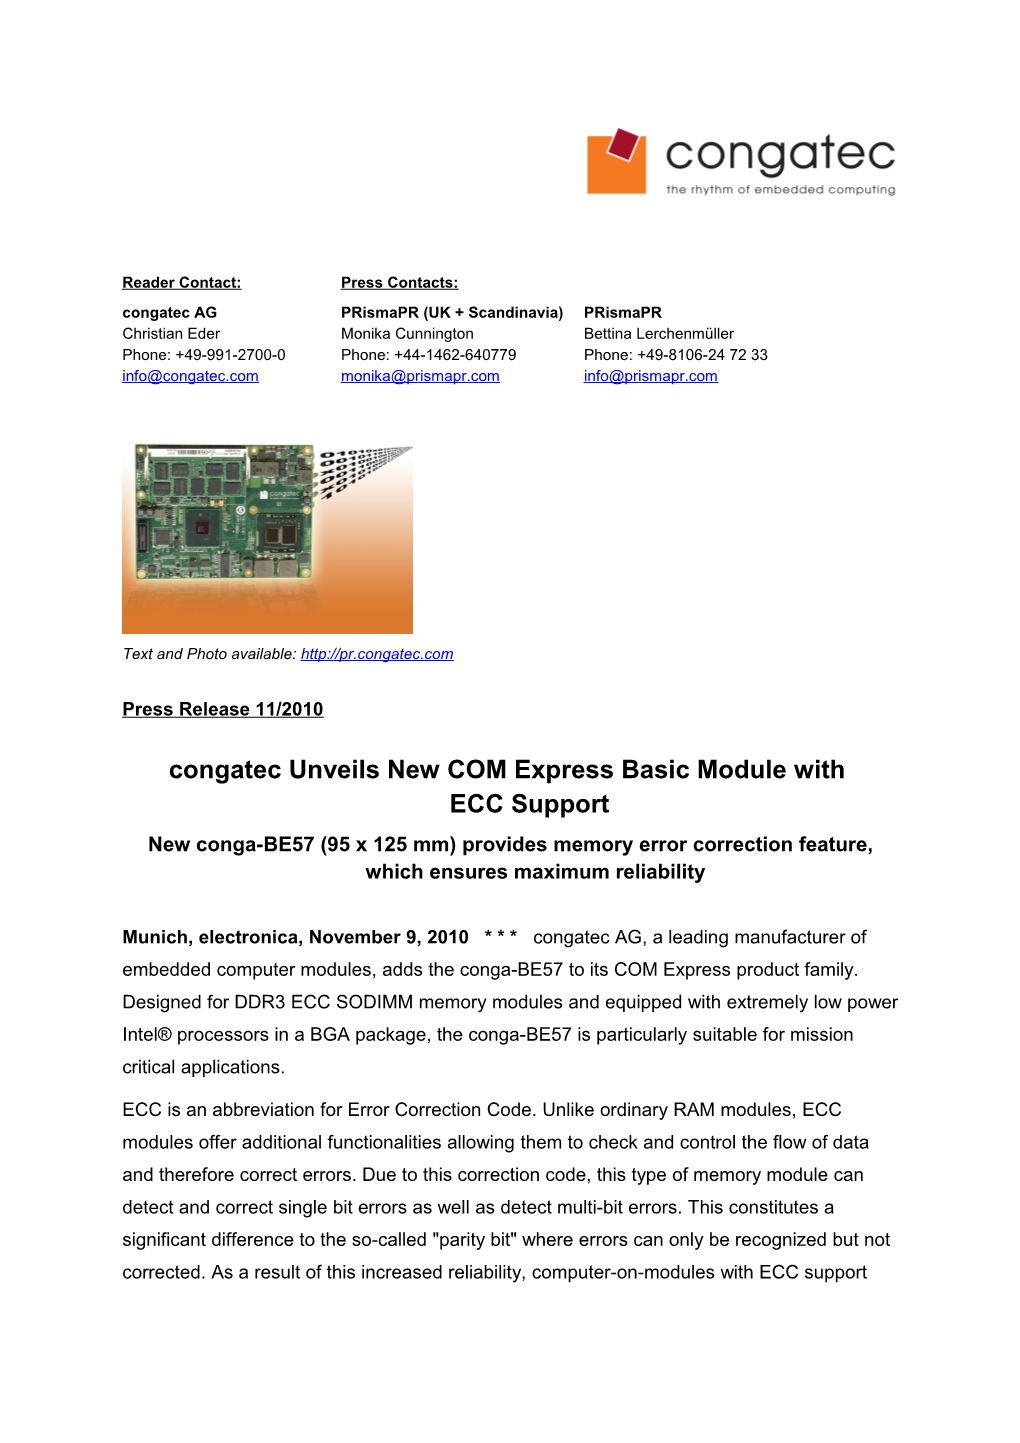 Congatec Unveils New COM Express Basic Module with ECC Support